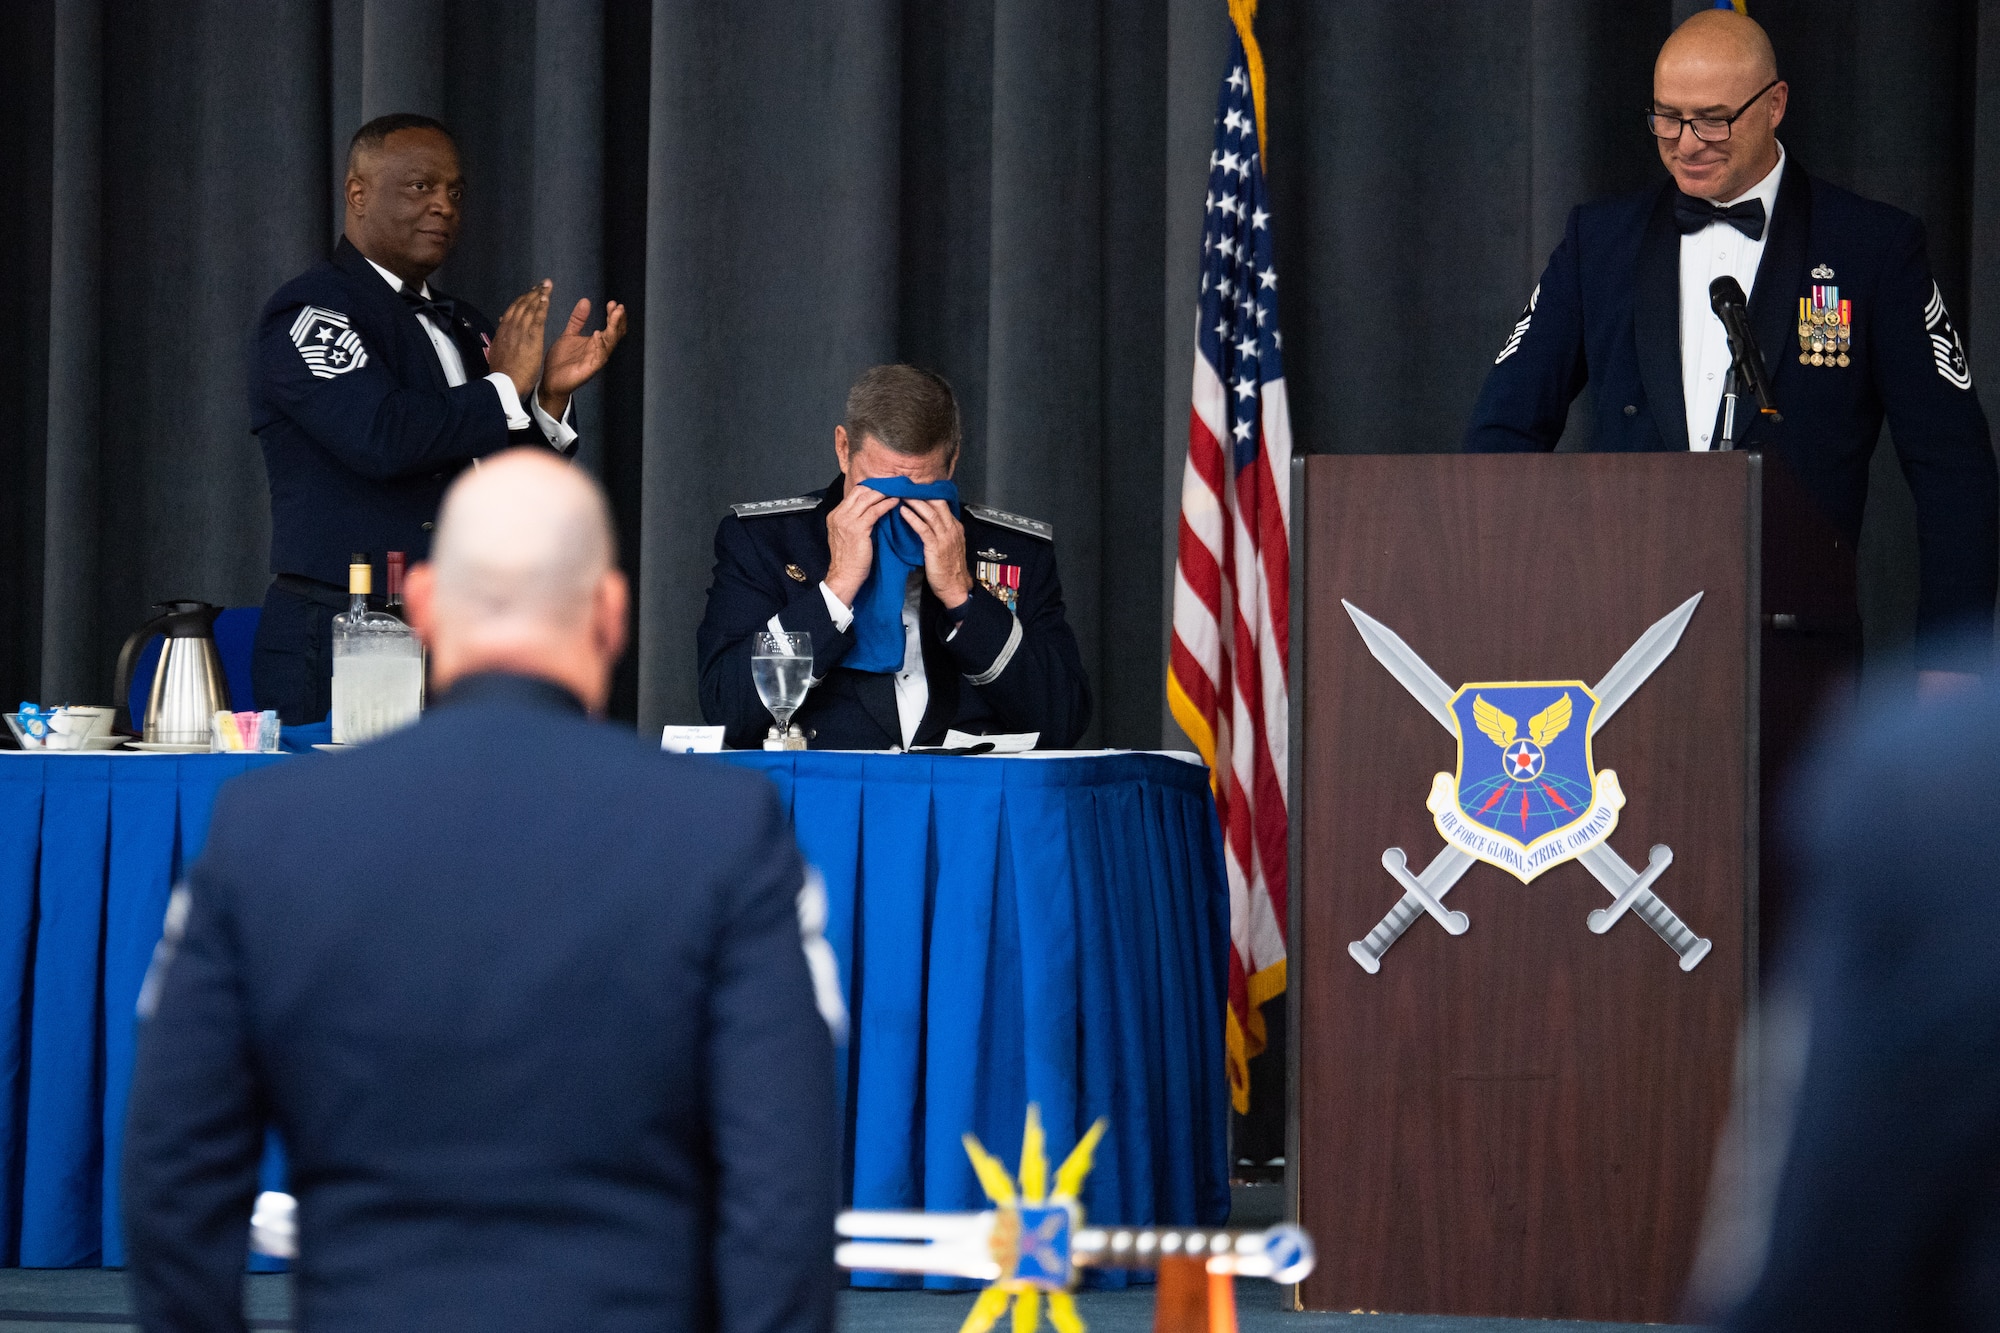 Retired Gen. Robin Rand, former Air Force Global Strike Command commander, wipes tears from his eyes after being honored at an Order of the Sword ceremony at Barksdale Air Force Base, Louisiana, April 23, 2021. The Order of the Sword is an Air Force tradition in which members of the enlisted corps recognize and honor senior officers and civilians who have made significant contributions to the welfare and prestige of the enlisted corps. (U.S. Air Force photo by Airman 1st Class Jacob B. Wrightsman)